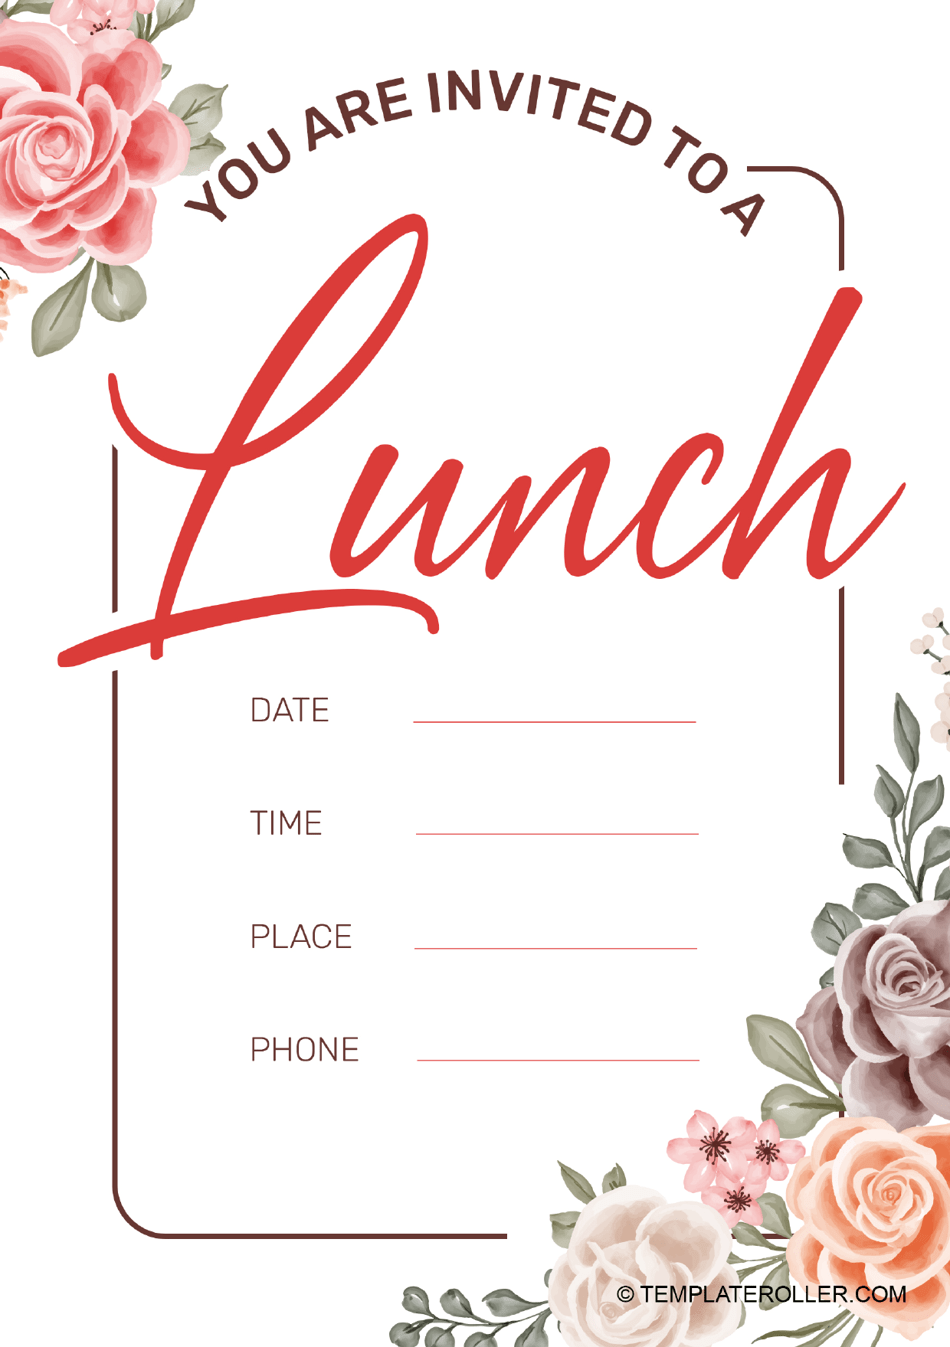 Lunch Invitation Template with Roses